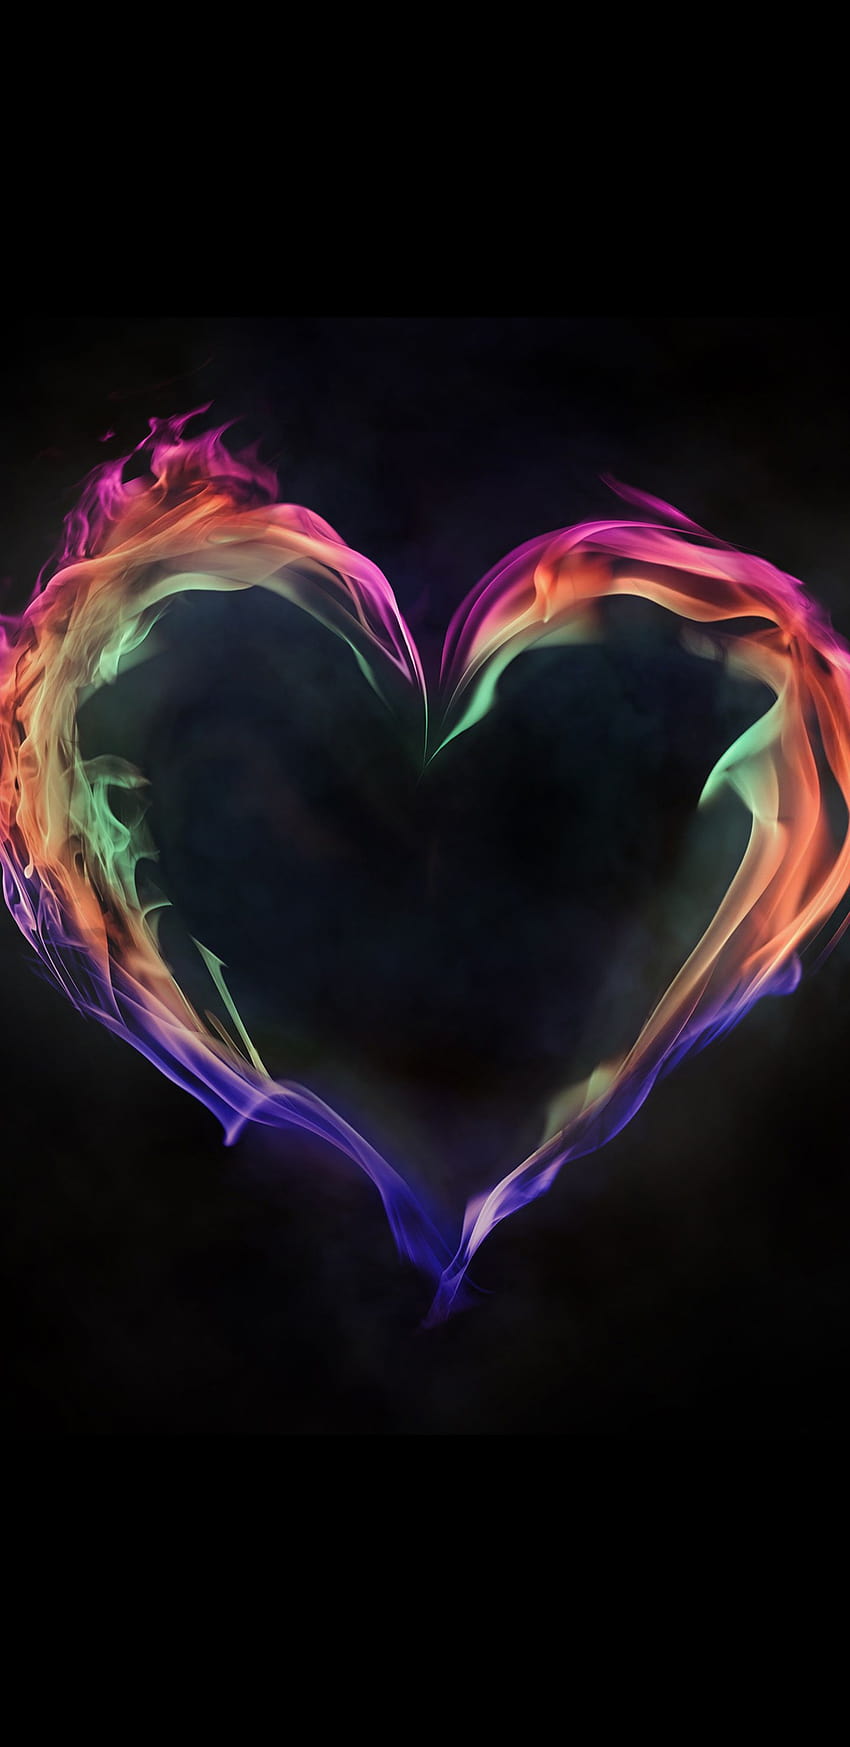 1440x2960 Flame Artistic Heart Love Samsung Galaxy Note 9,8, S9,S8,S Q , Backgrounds, and, galaxy heart HD phone wallpaper